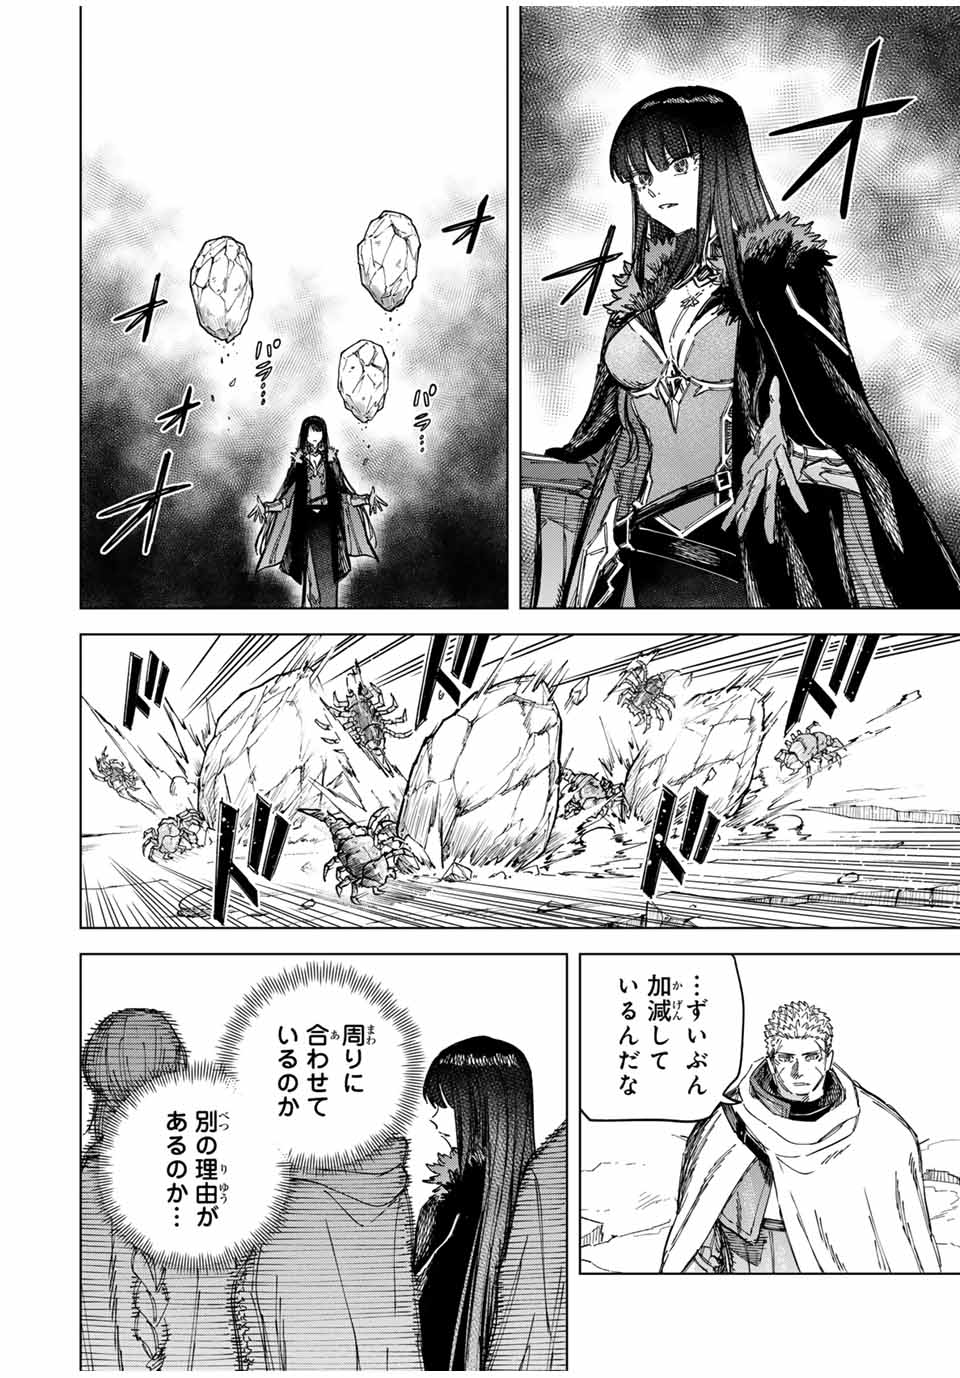 Witch and Mercenary 魔女と傭兵 第17話 - Page 14